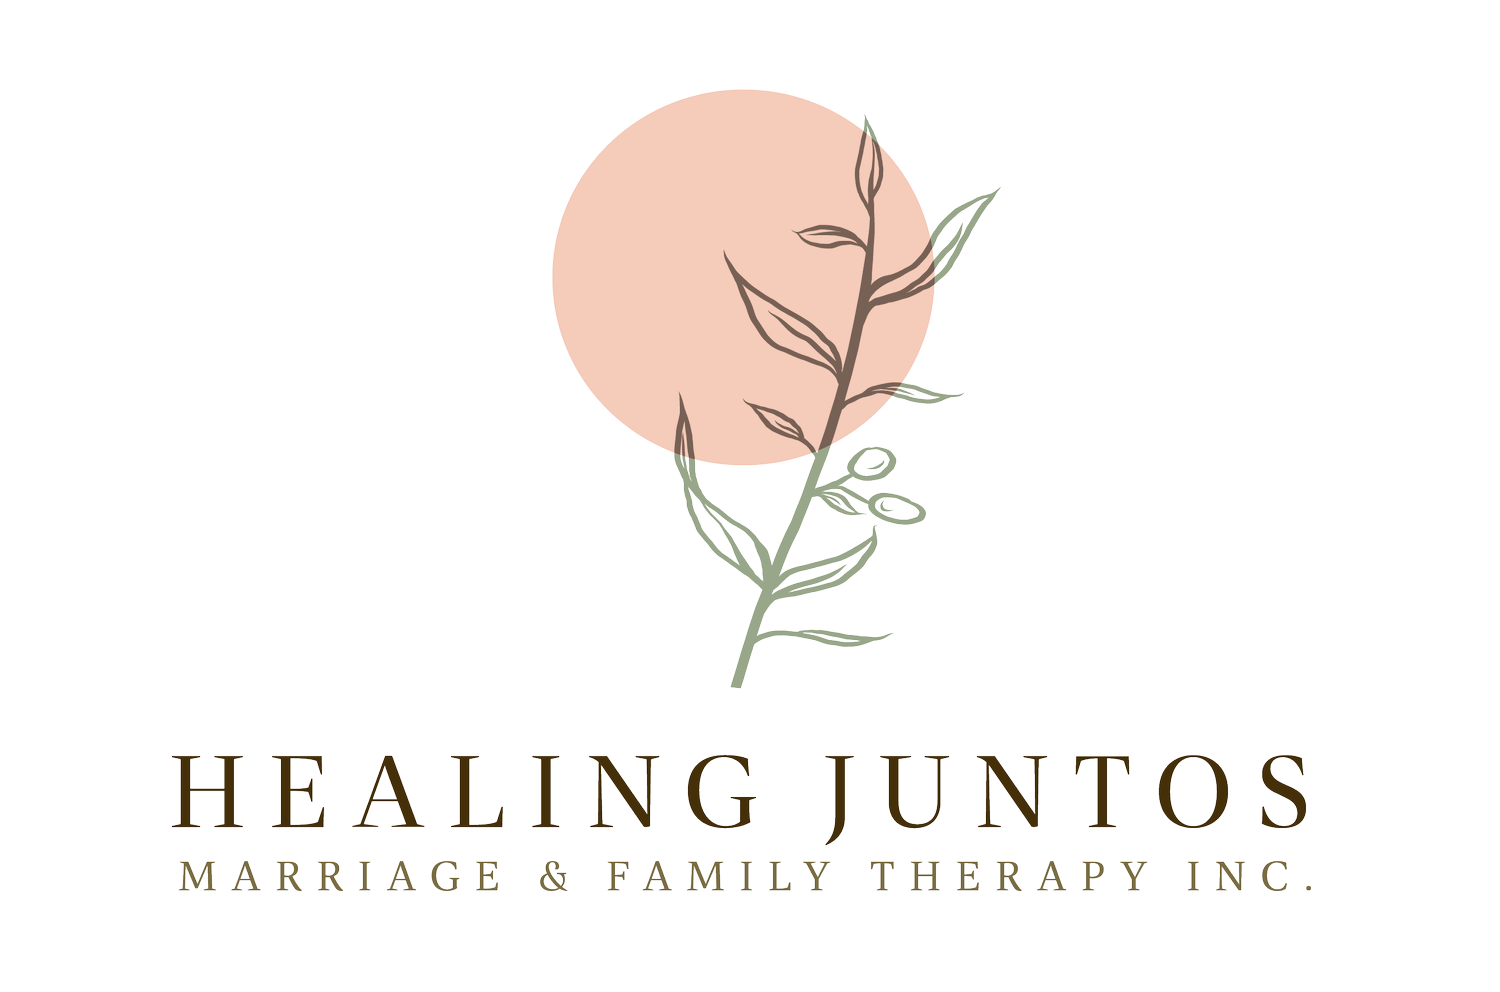 Healing Juntos Marriage &amp; Family Therapy, inc